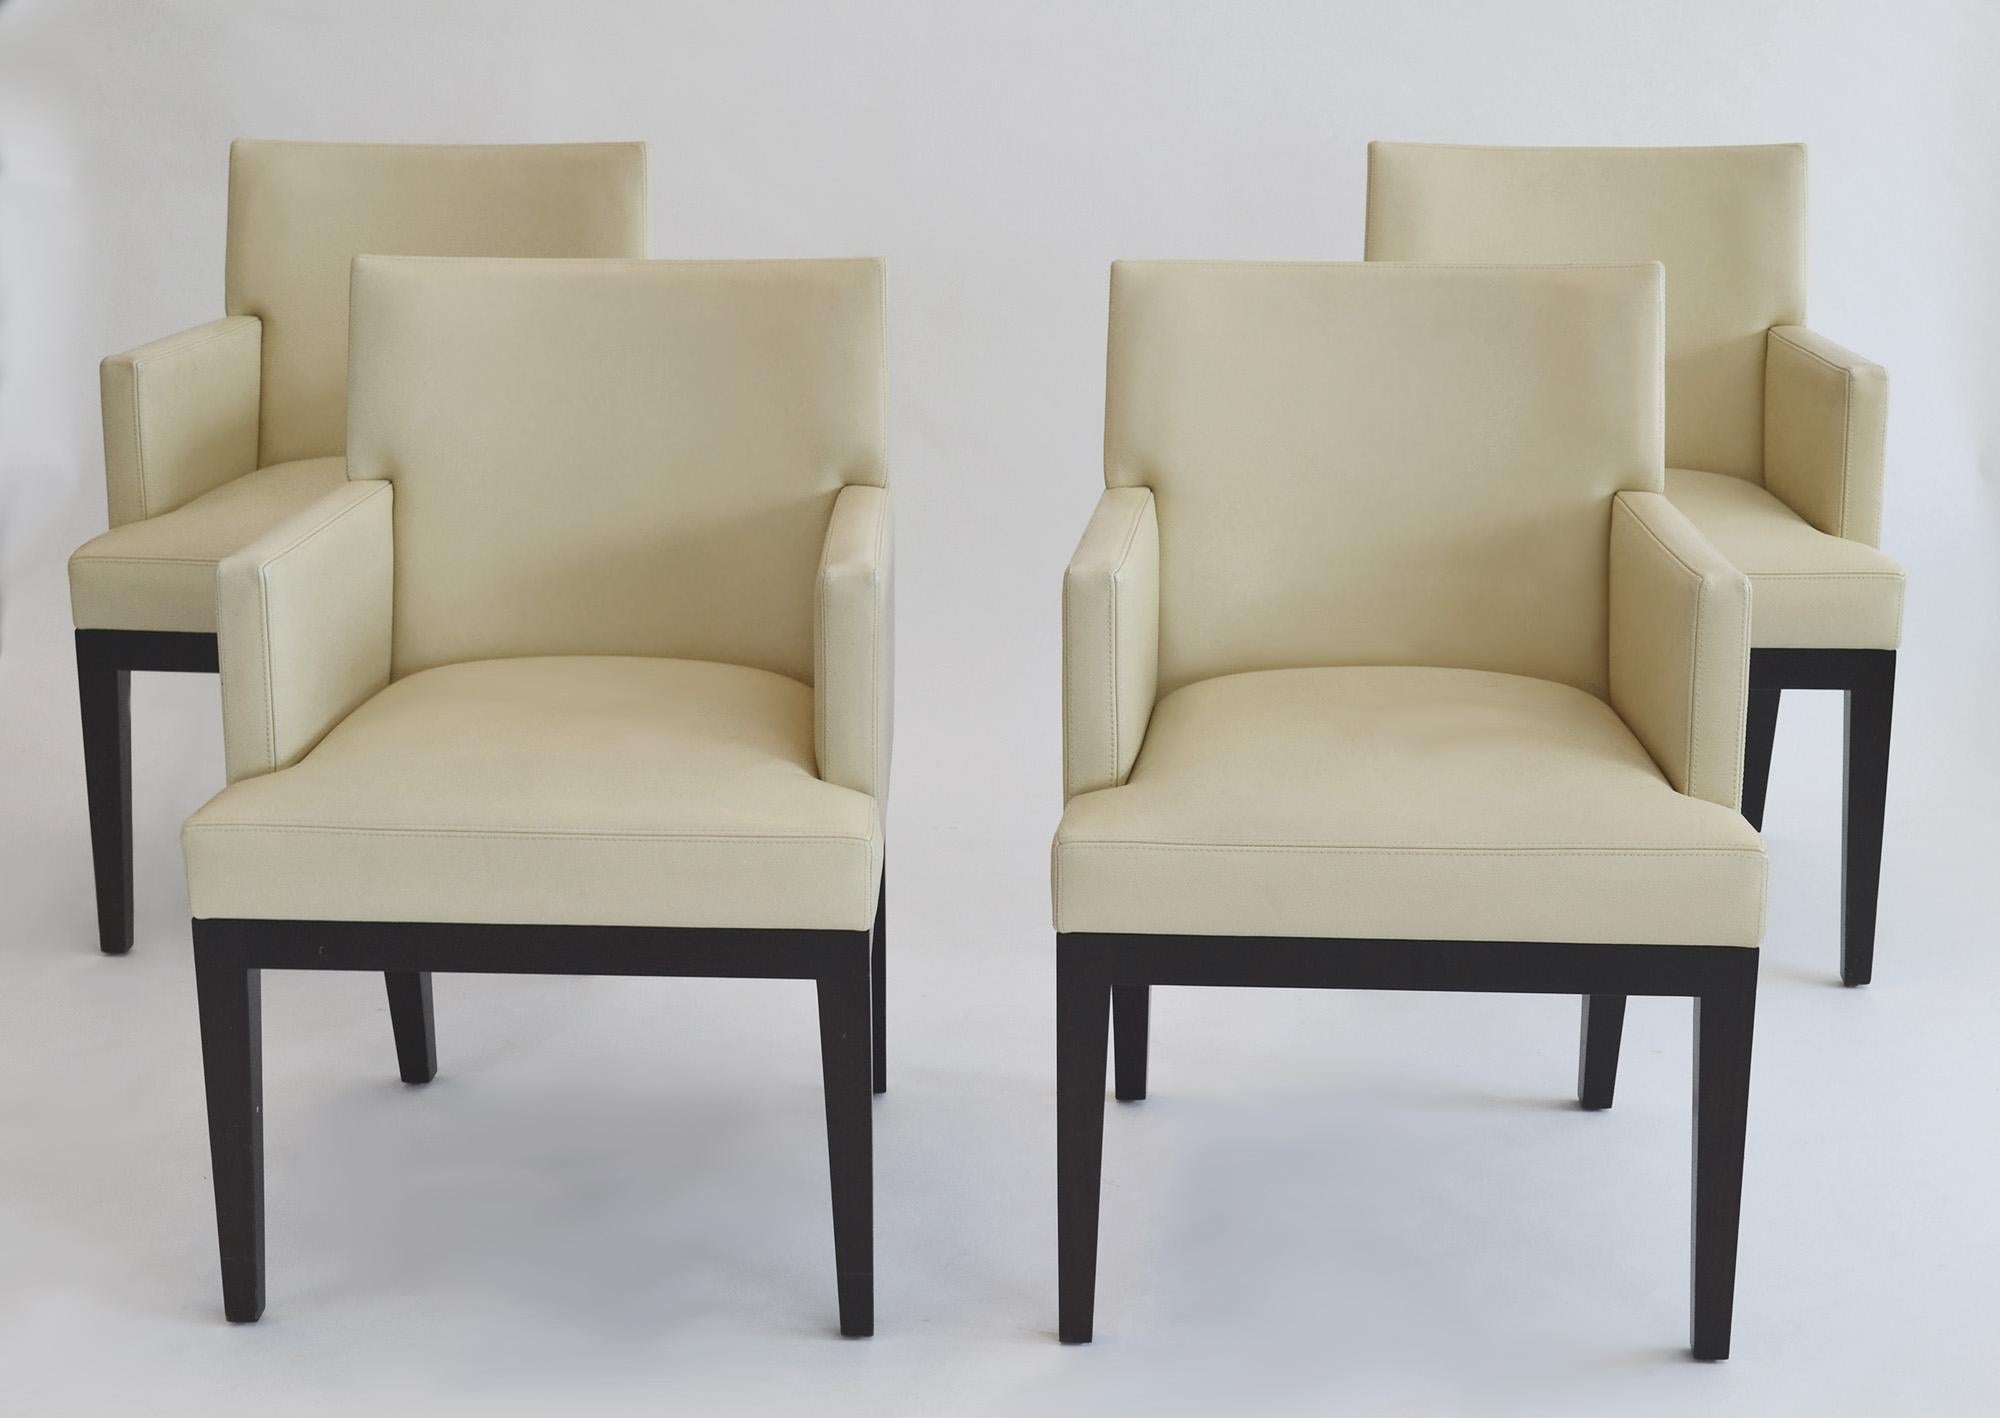 Set of Four Leather Dining / Arm Chairs Christian Liaigre for Holly Hunt c. 2000
Made in France for Holly Hunt in lacquered mahogany upholstered in soft butter-colored leather.
Brass manufacturer's label to underside of each example ‘Christian